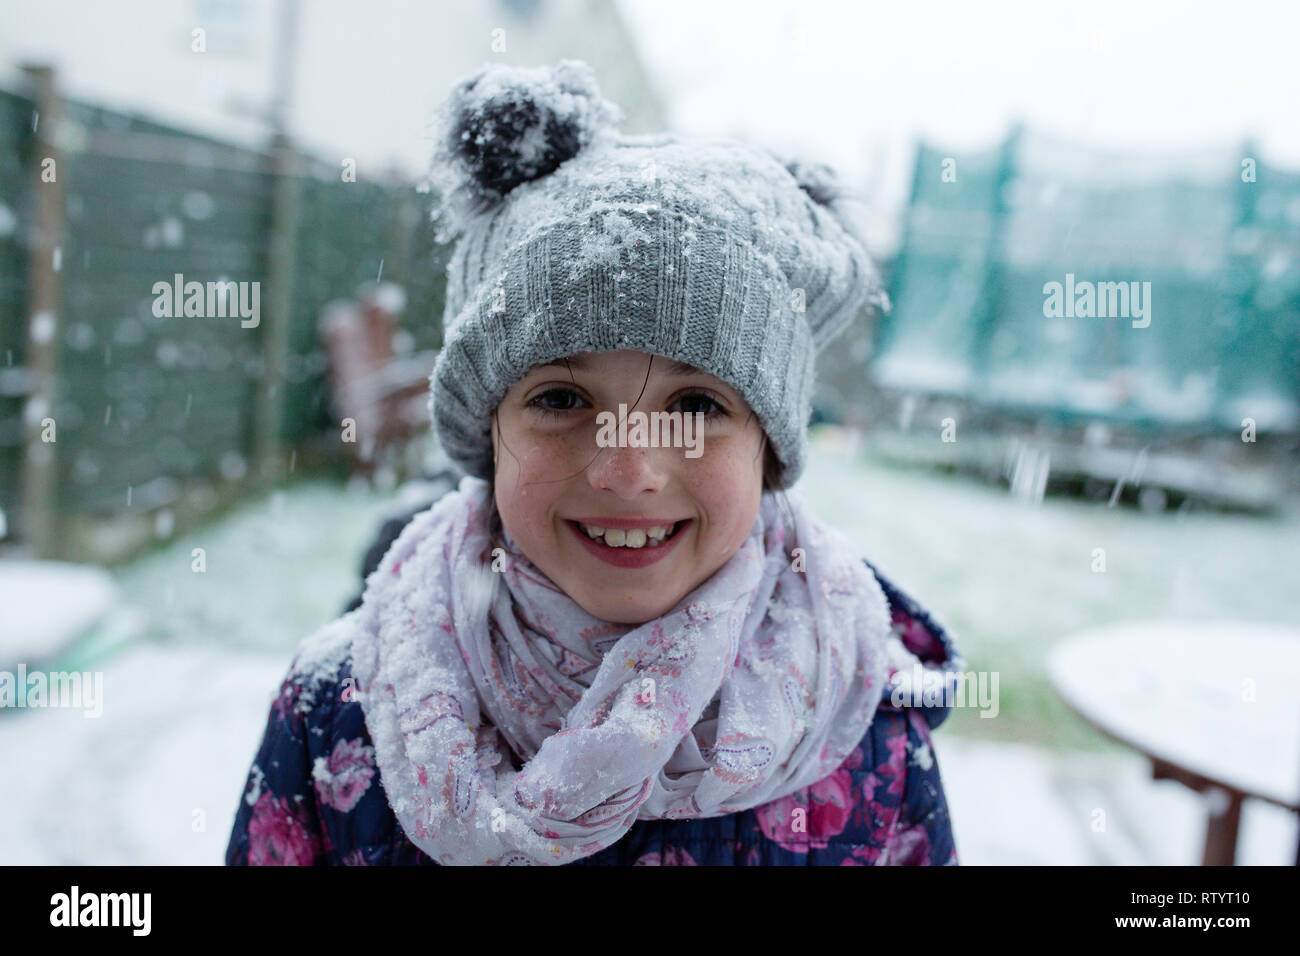 Celbridge, Kildare, Ireland. 3rd March 2019: Weather news. Exactly a year after beast from the east struck Ireland, an unexpected heavy snow fall passes through Celbridge Kildare. Kids having the most of it making snowman and enjoying playing in snow. Credit: Michael Grubka/Alamy Live News Stock Photo